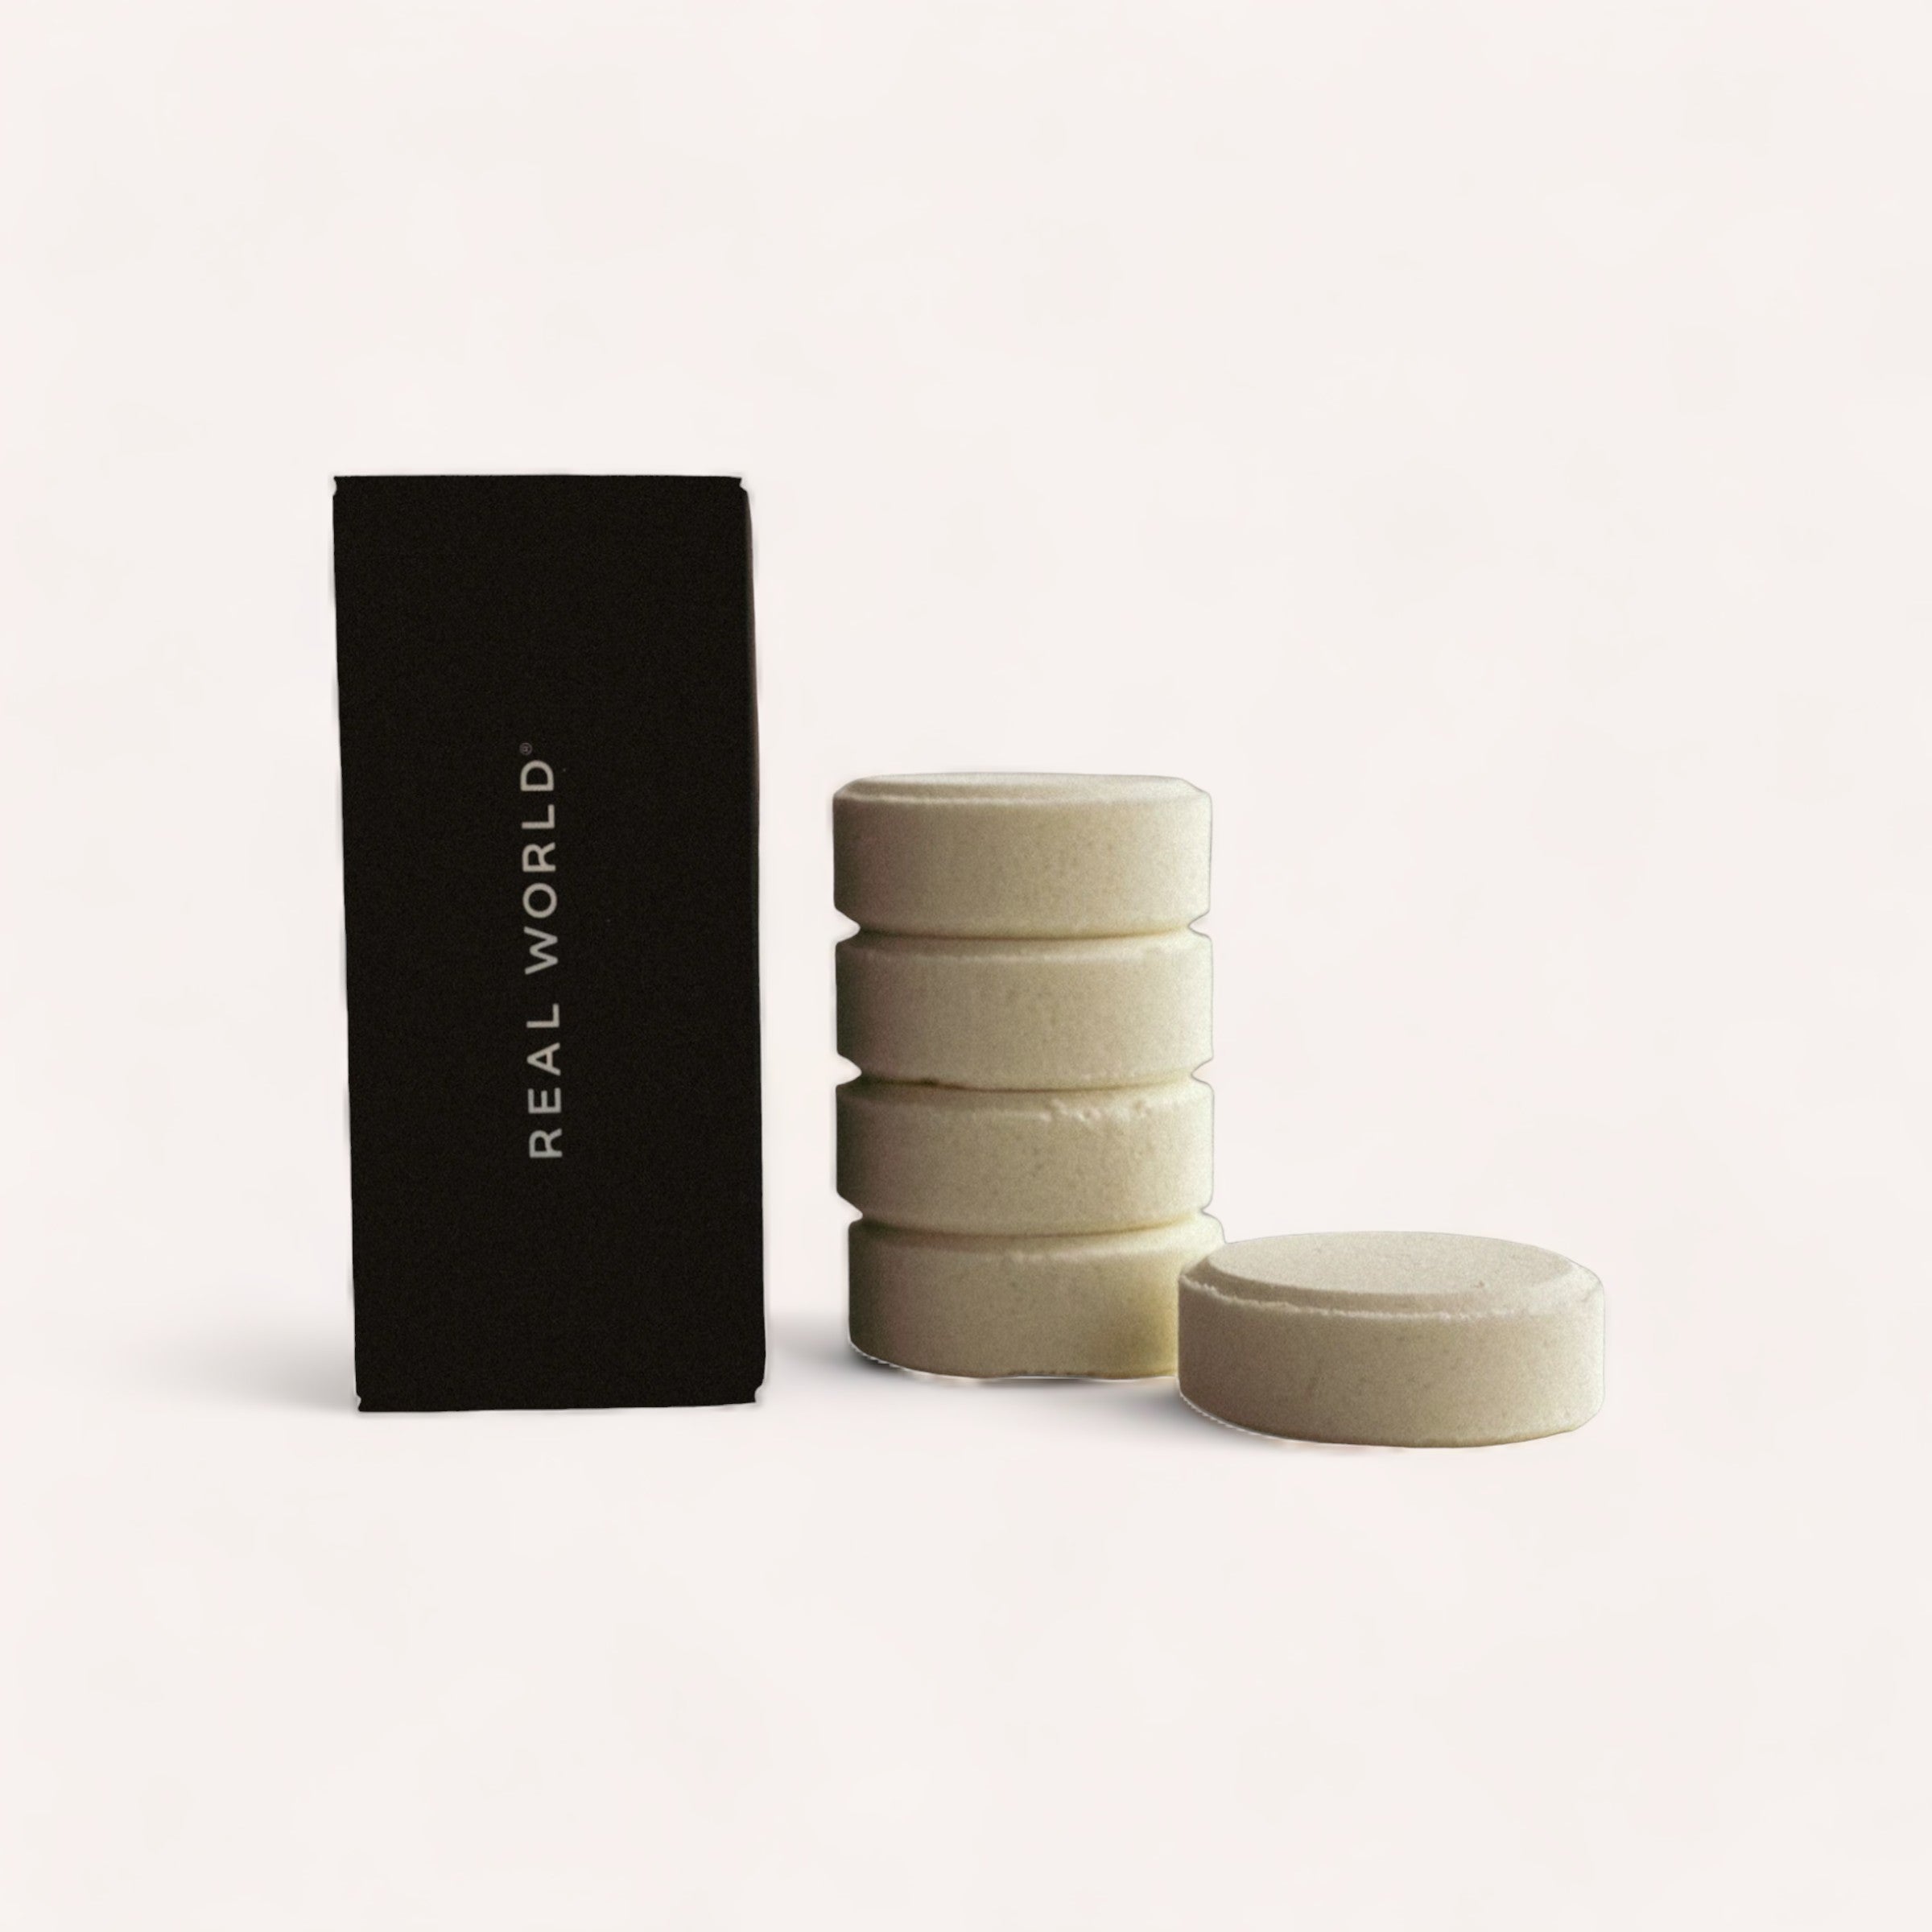 A stack of four natural-colored lemongrass Shower Steamers by Real World solid shampoo bars next to a single bar, with an elegant black packaging labeled "Aroma Koromiko.